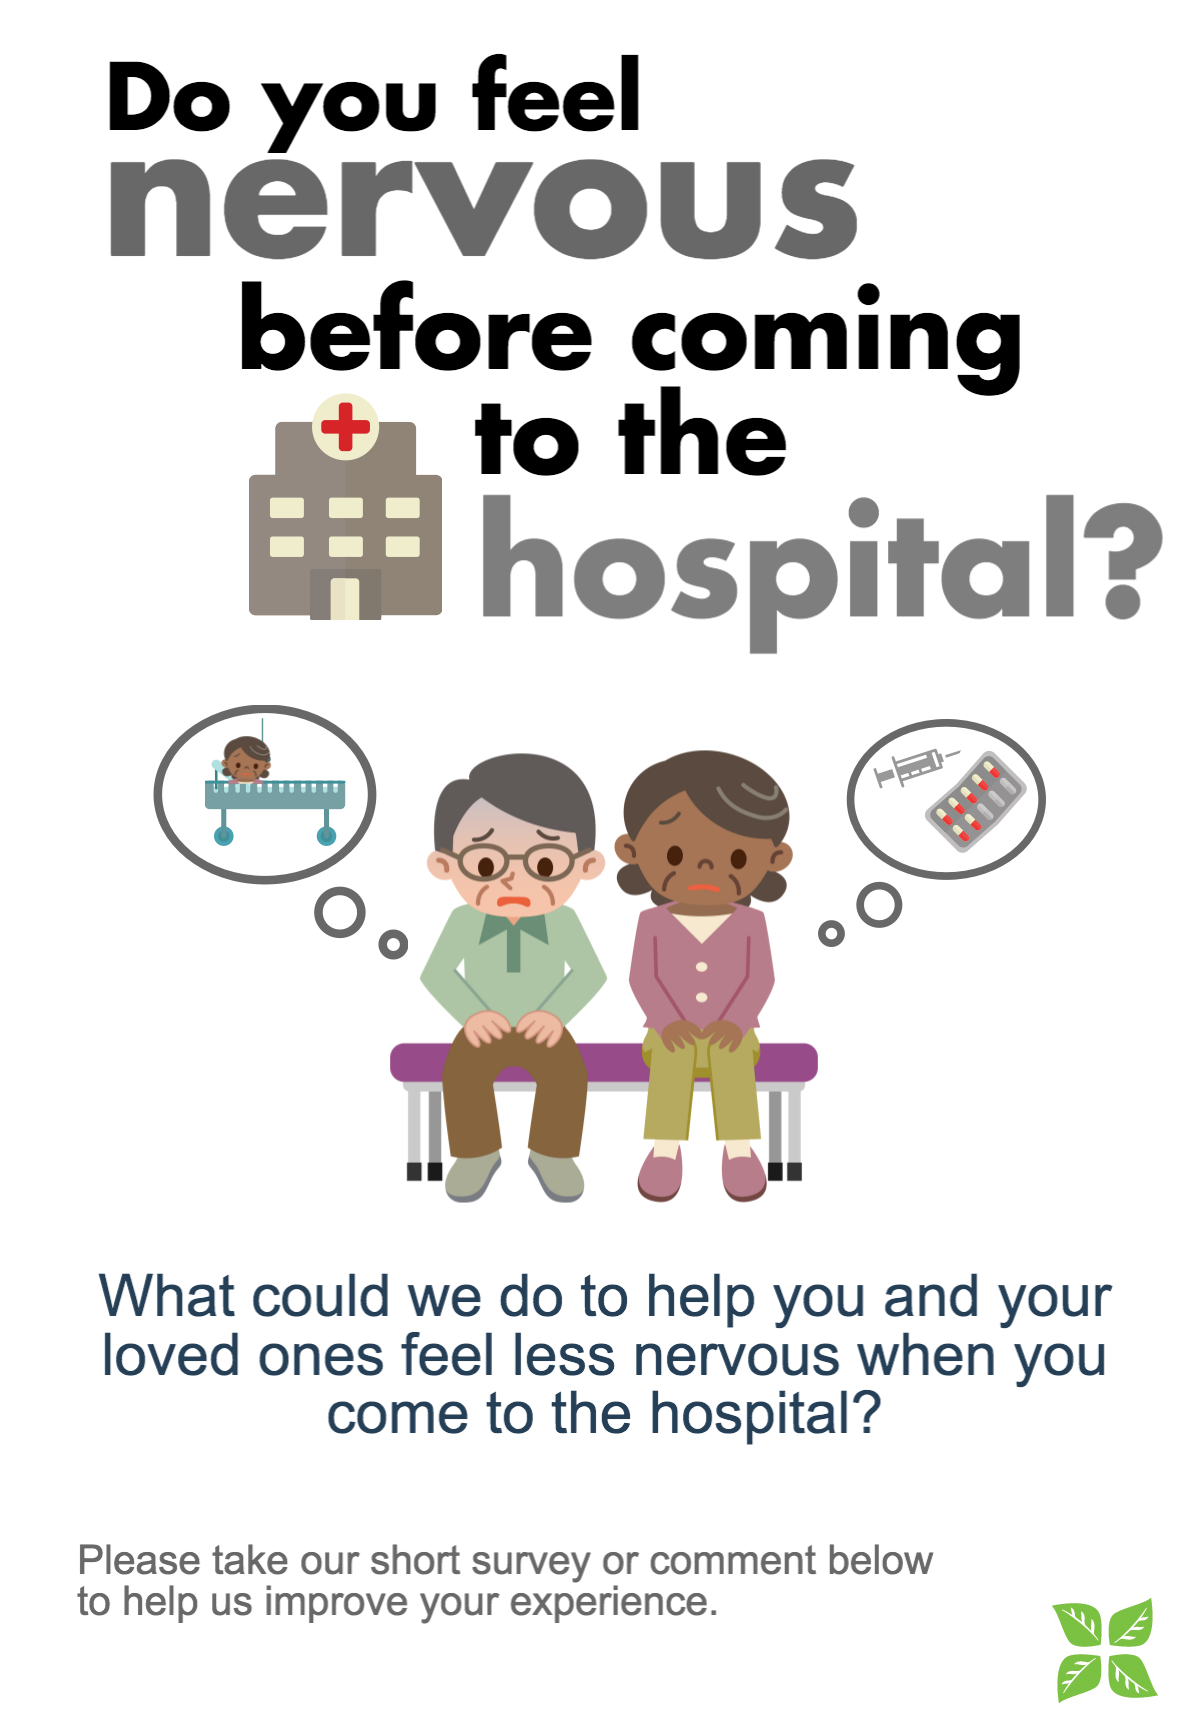 Do you feel nervous before coming to the hospital? What could we do to help you and your loved ones feel less nervous when you come to the hospital? Please take our short survey or comment below to help us improve your experience.